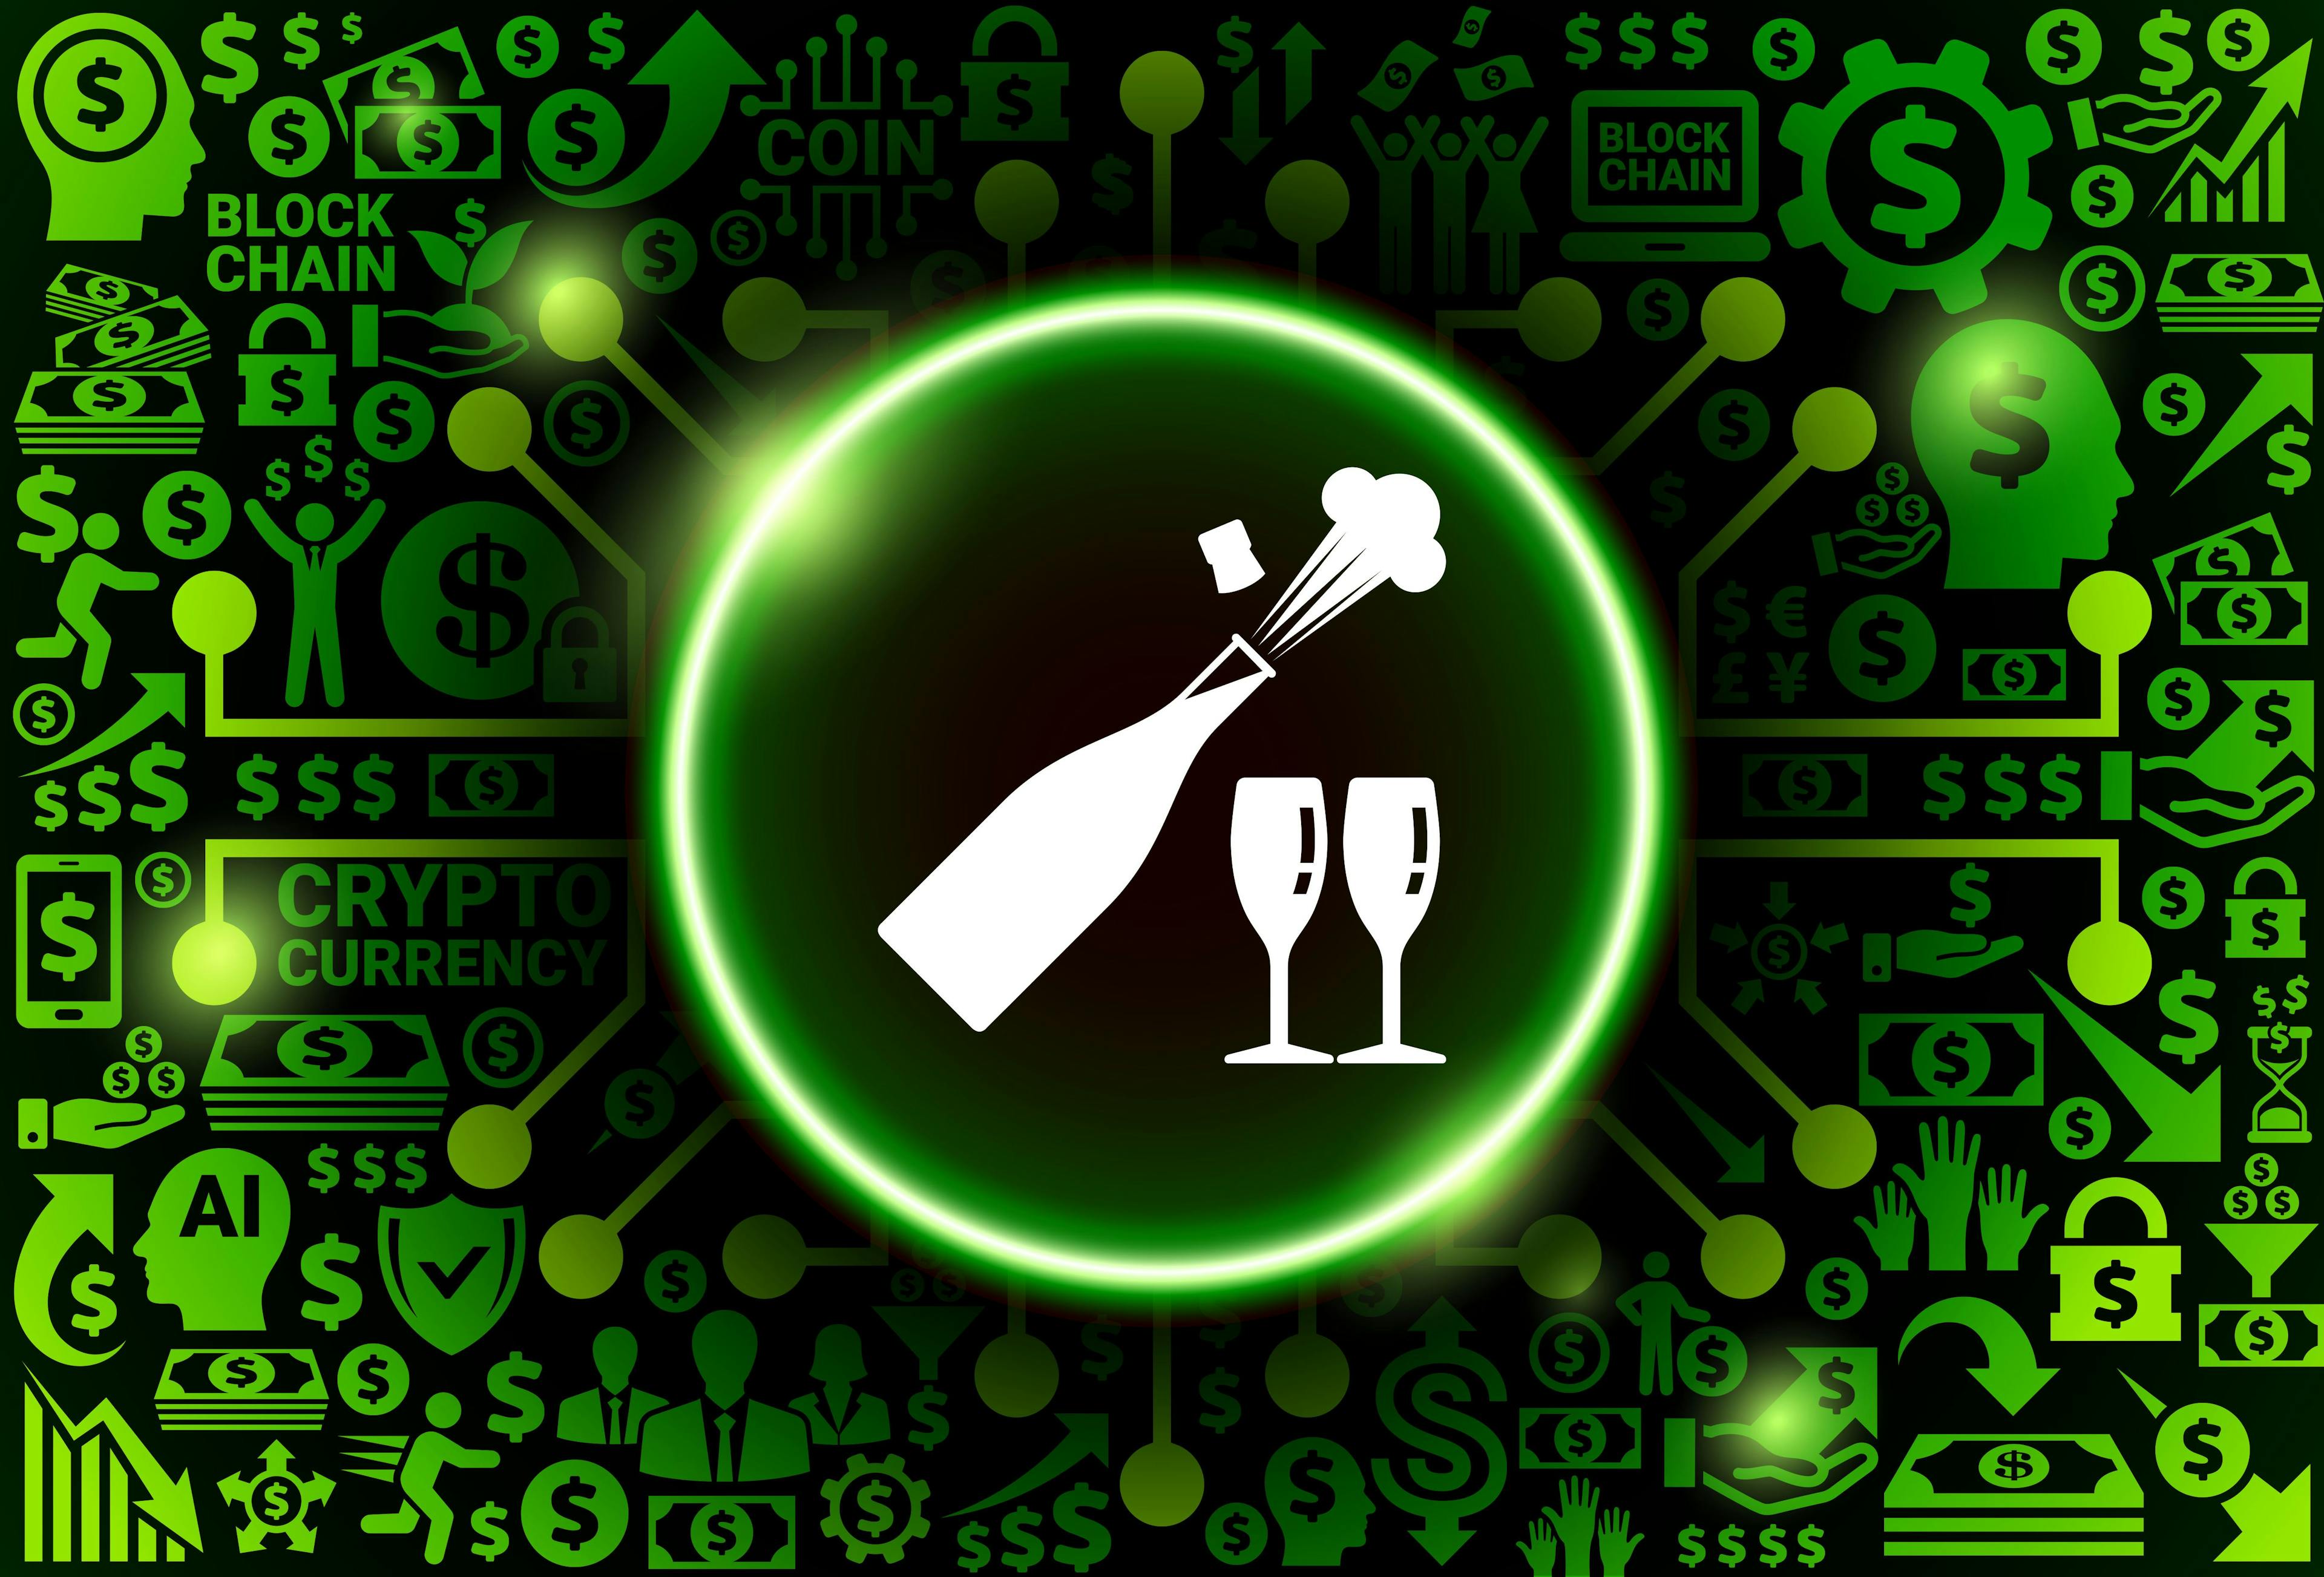 Wine bottle and two glasses surrounded by images of crypto and blockchain